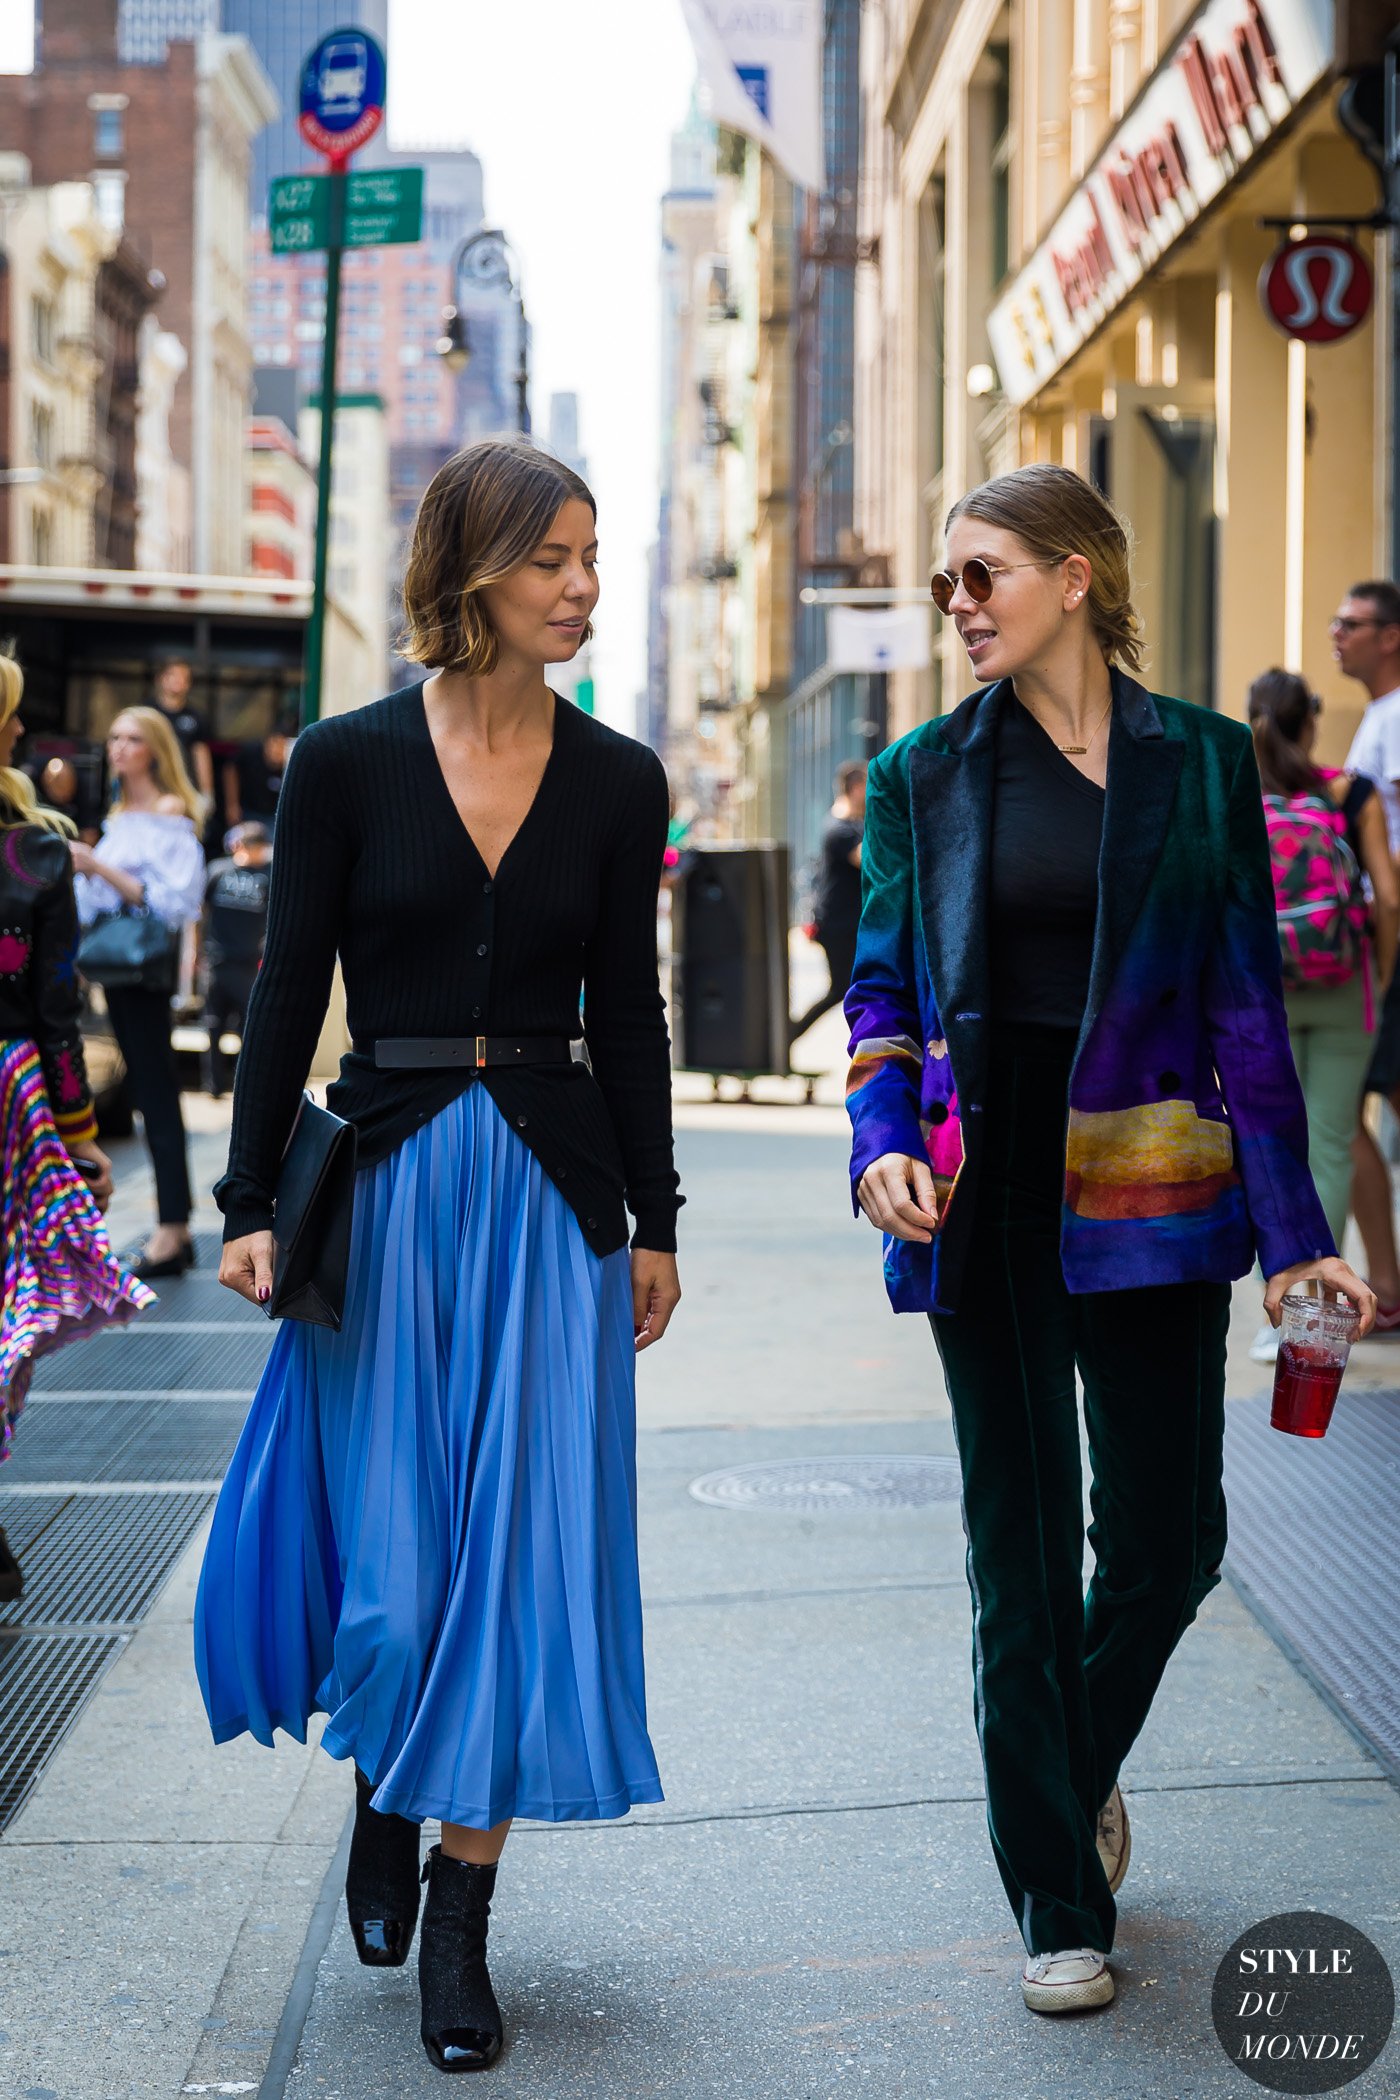 Annina Mislin and Megan Bowman Gray by STYLEDUMONDE Street Style Fashion Photography_48A7834